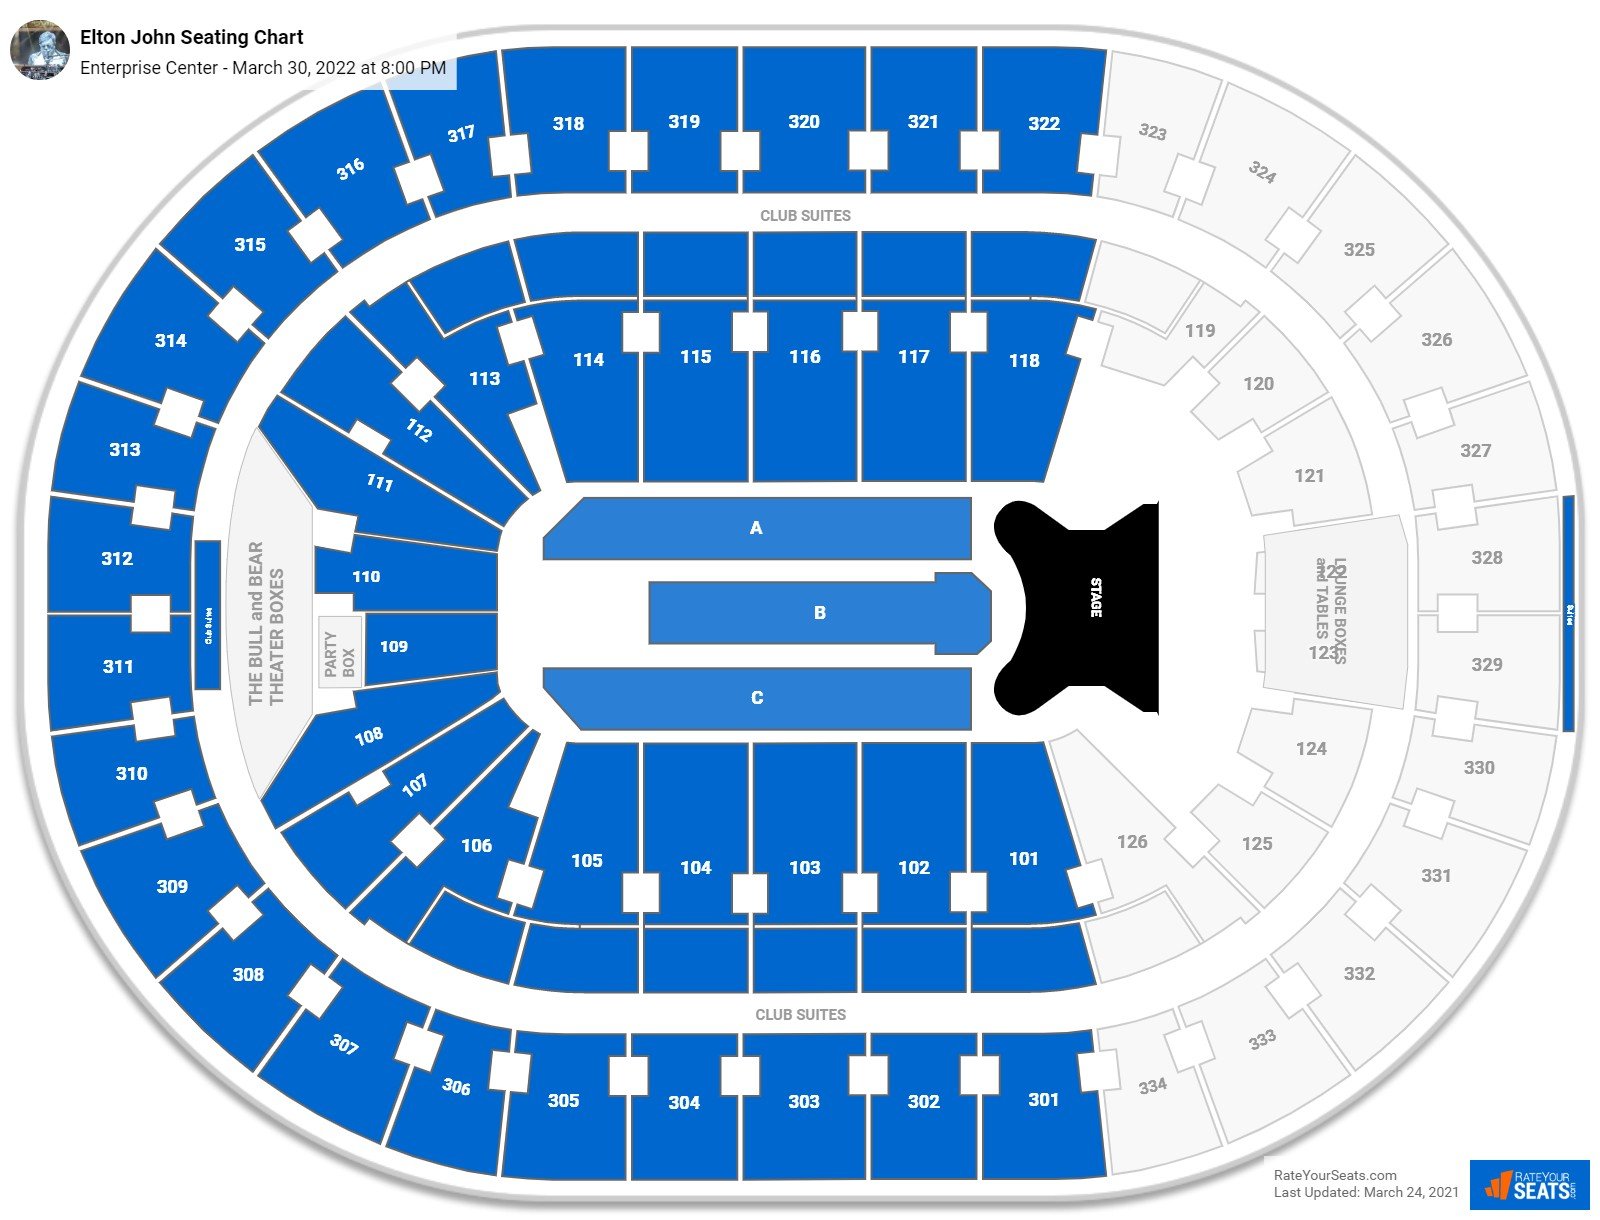 Enterprise Center Seating Charts for Concerts